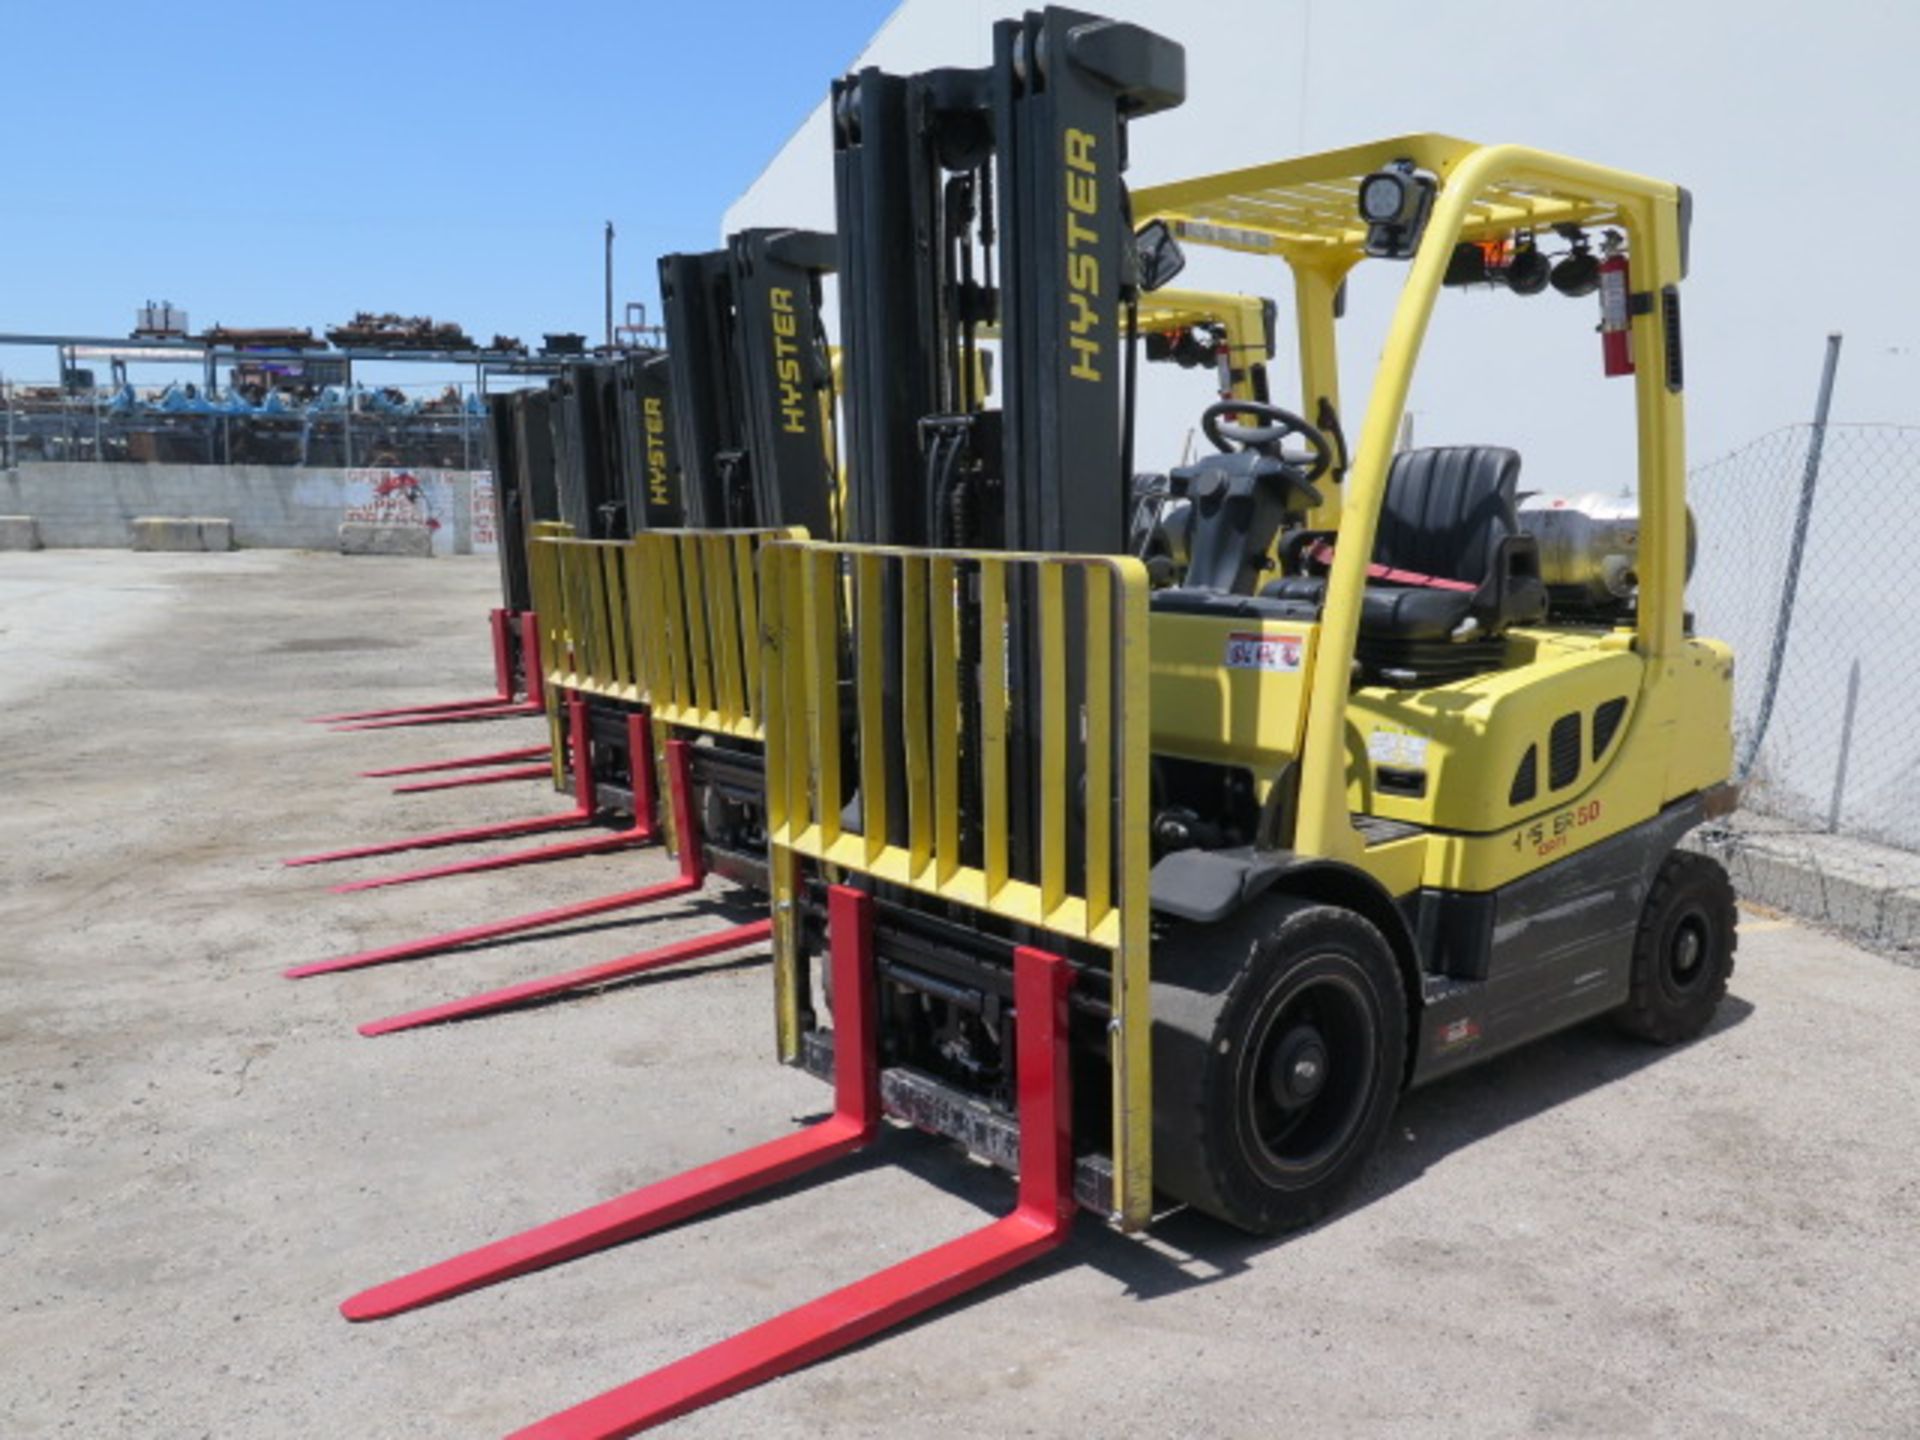 2017 Hyster H50FT 5000 Lb LPG Forklift s/n P177V06250 w/ 3-Stage,189” Lift, Side Shift, SOLD AS IS